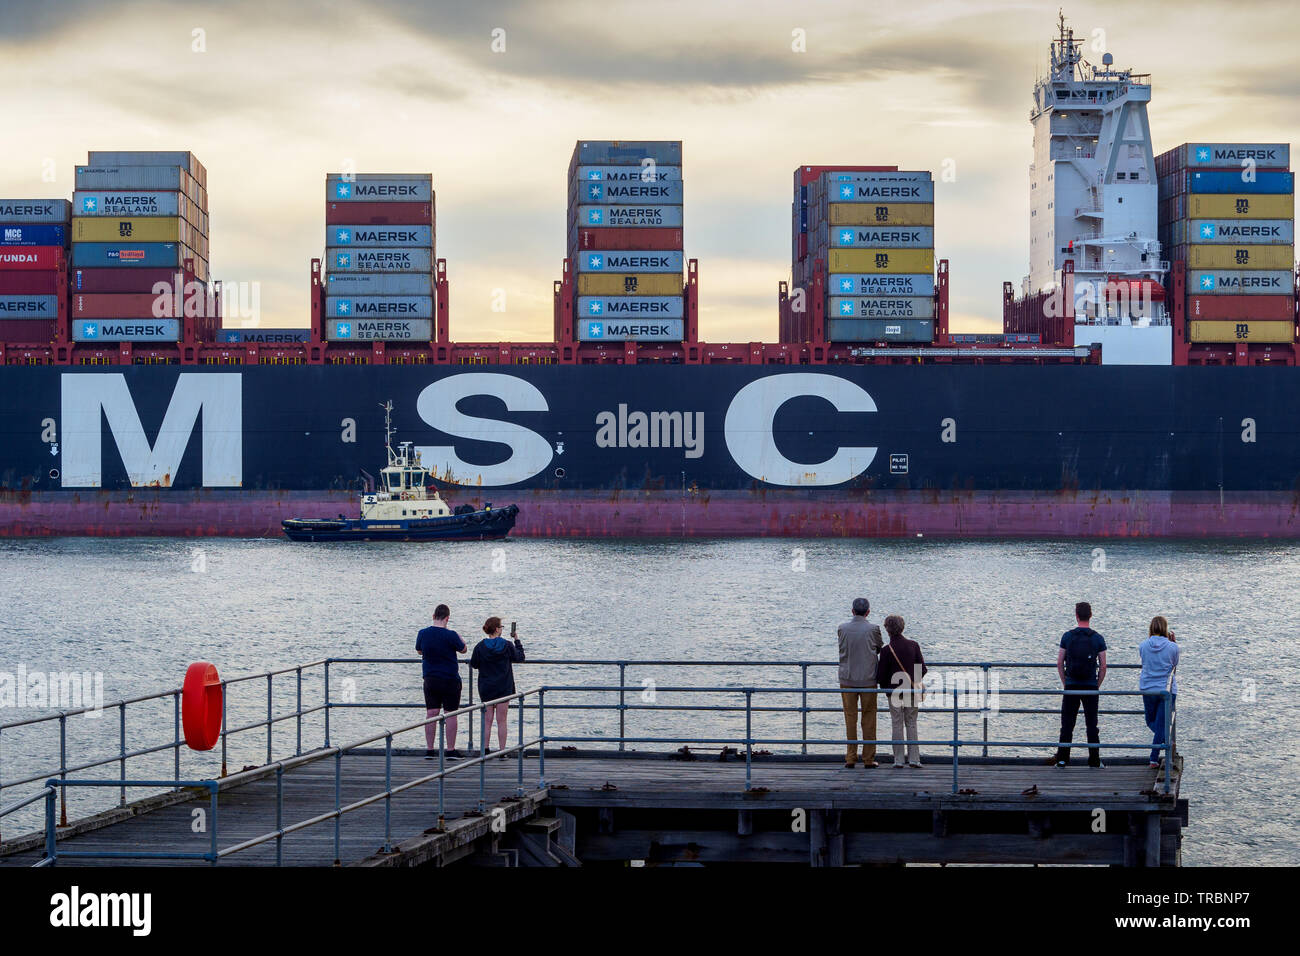 Shipwatching - onlookers watch the MSC Sveva container ship entering the Port of Felixstowe in the UK Stock Photo